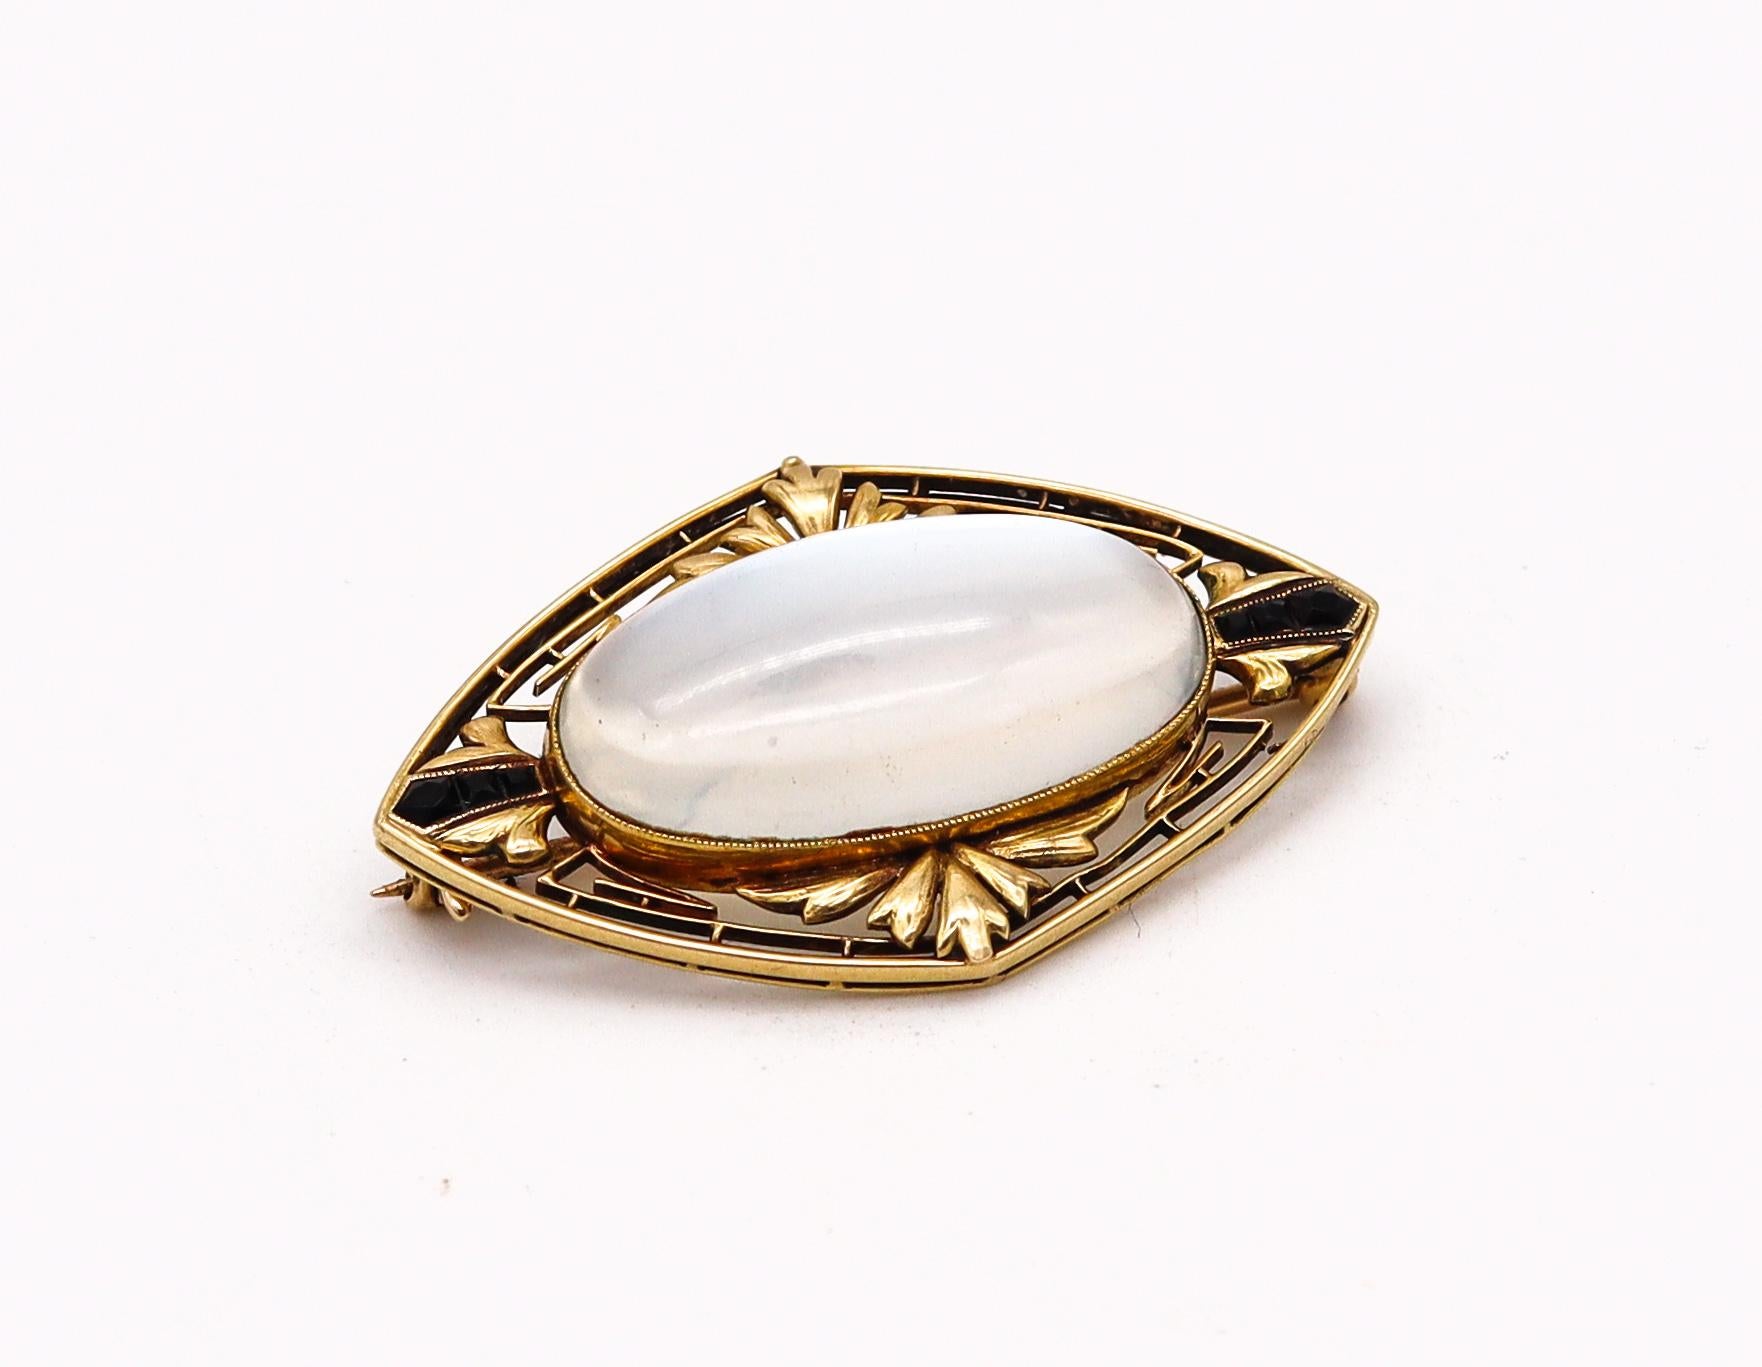 Cabochon Art Deco 1920 Antique Pendant Brooch 18kt Gold with 29.58 Ctw Moonstone & Onyx